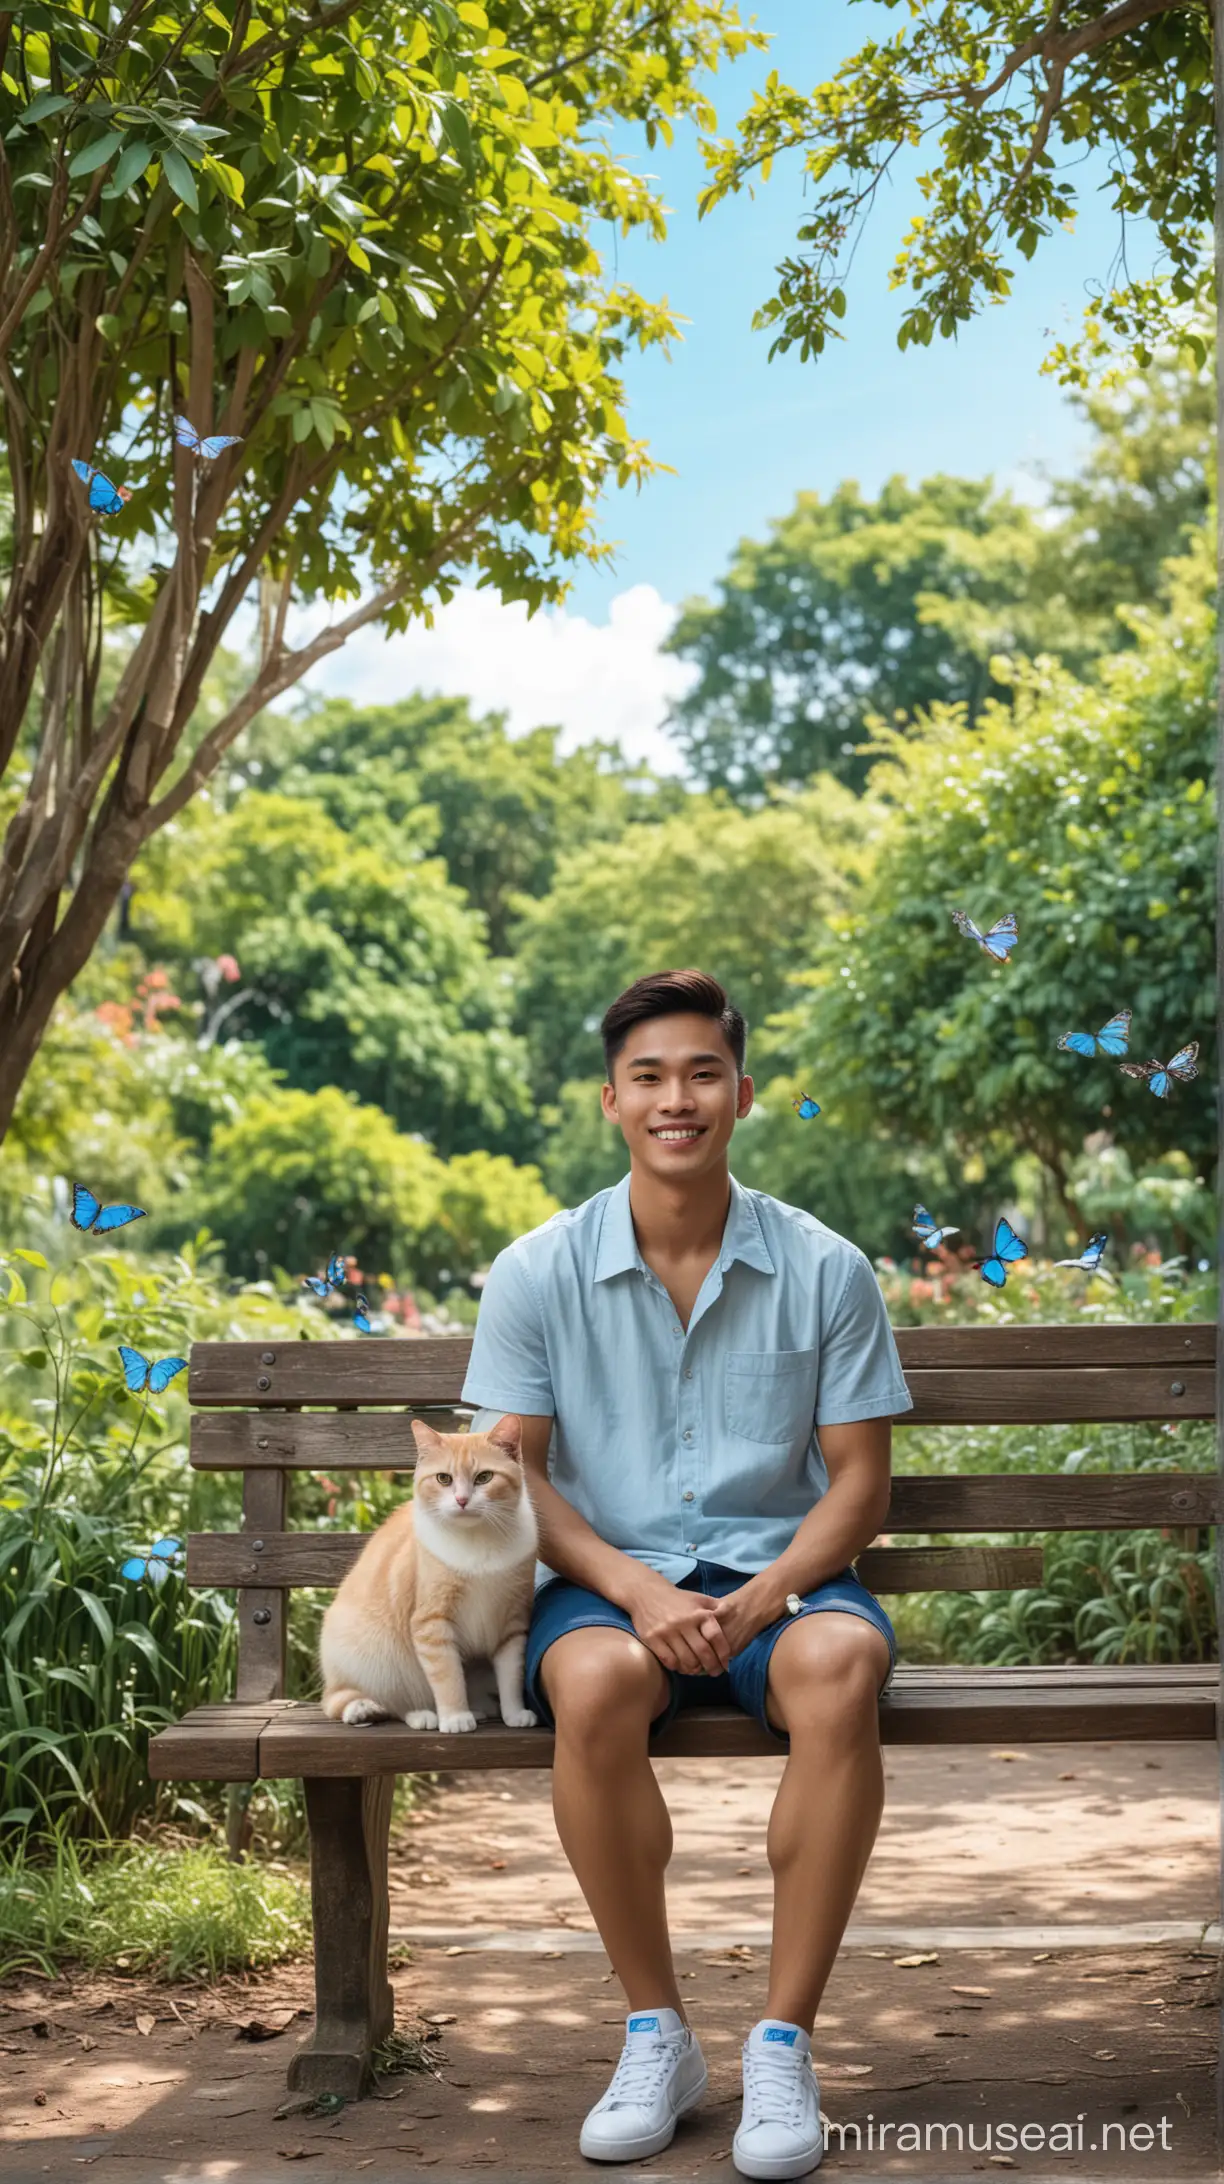 Handsome Thai Guy Relaxing with Cute Cat in Serene Park Setting